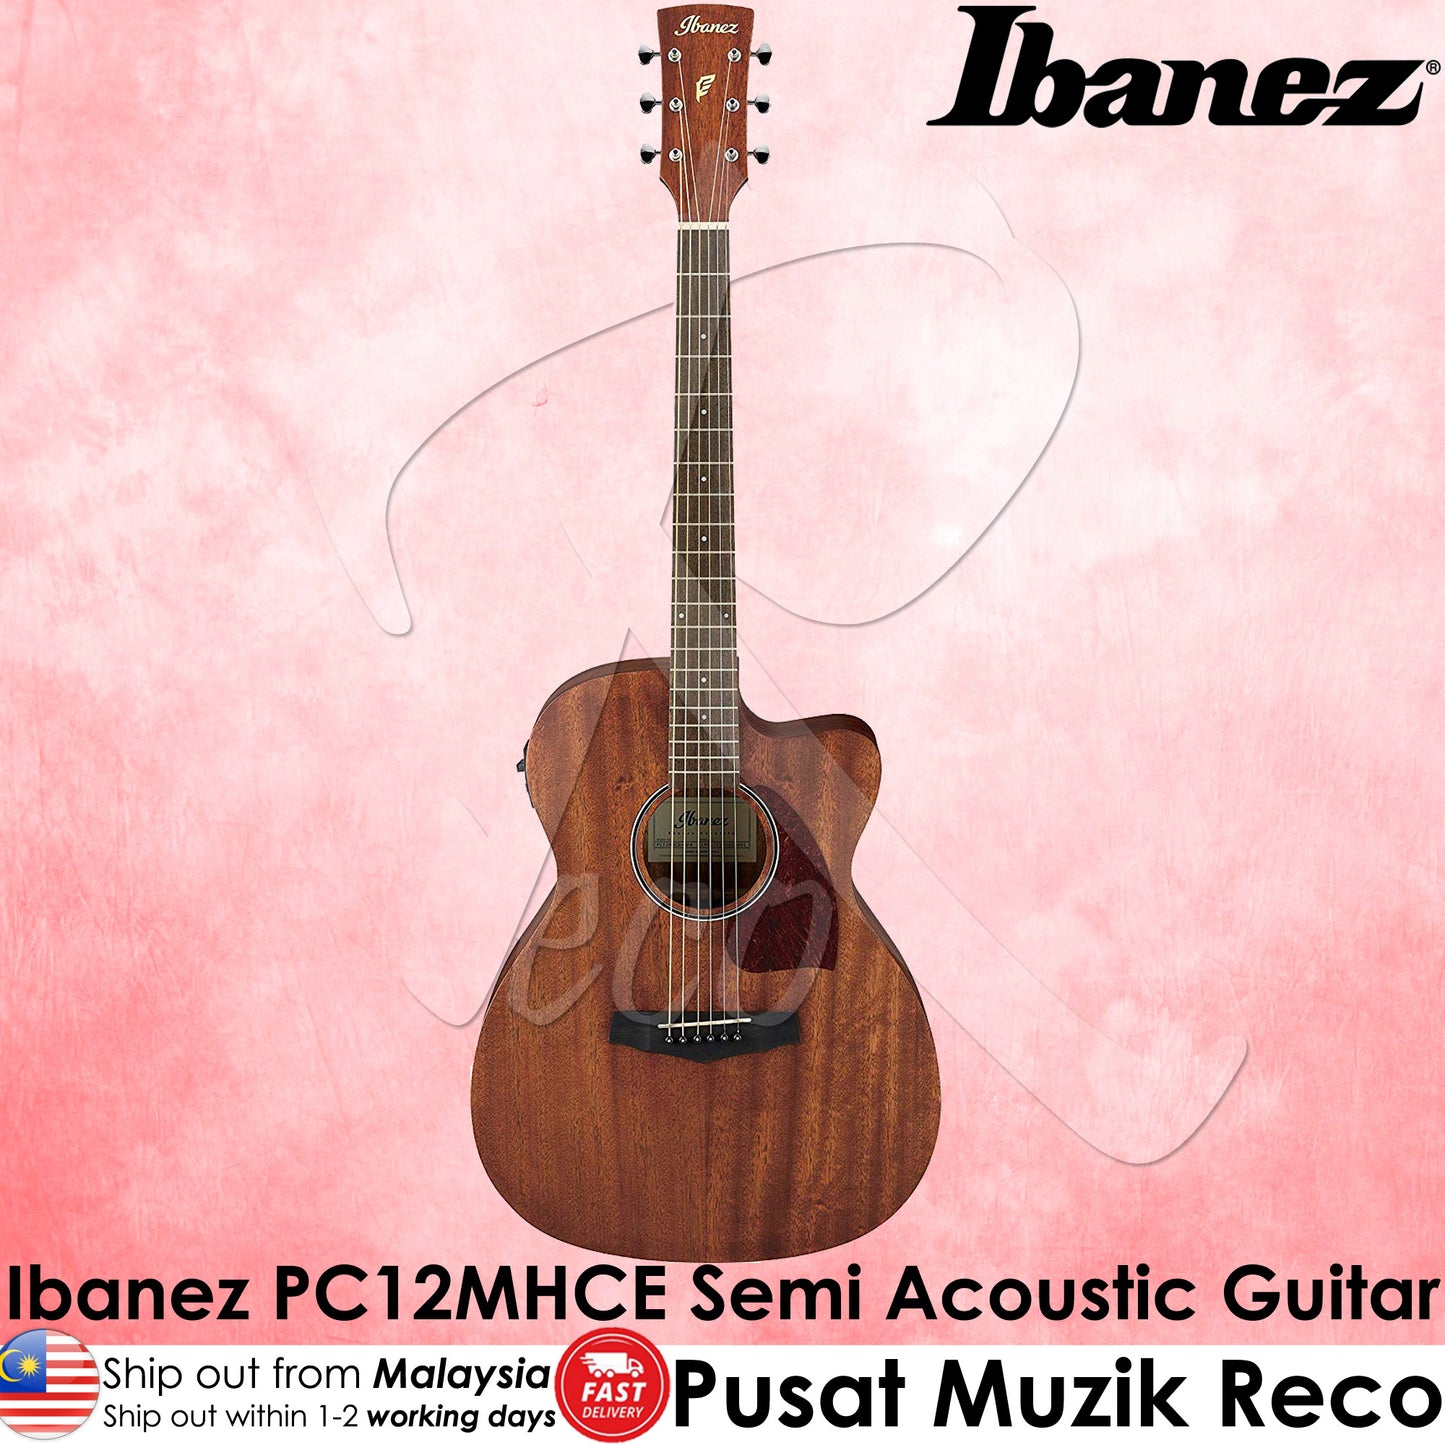 Ibanez PC12MHCE OPN Grand Concert Semi Acoustic Guitar - Reco Music Malaysia